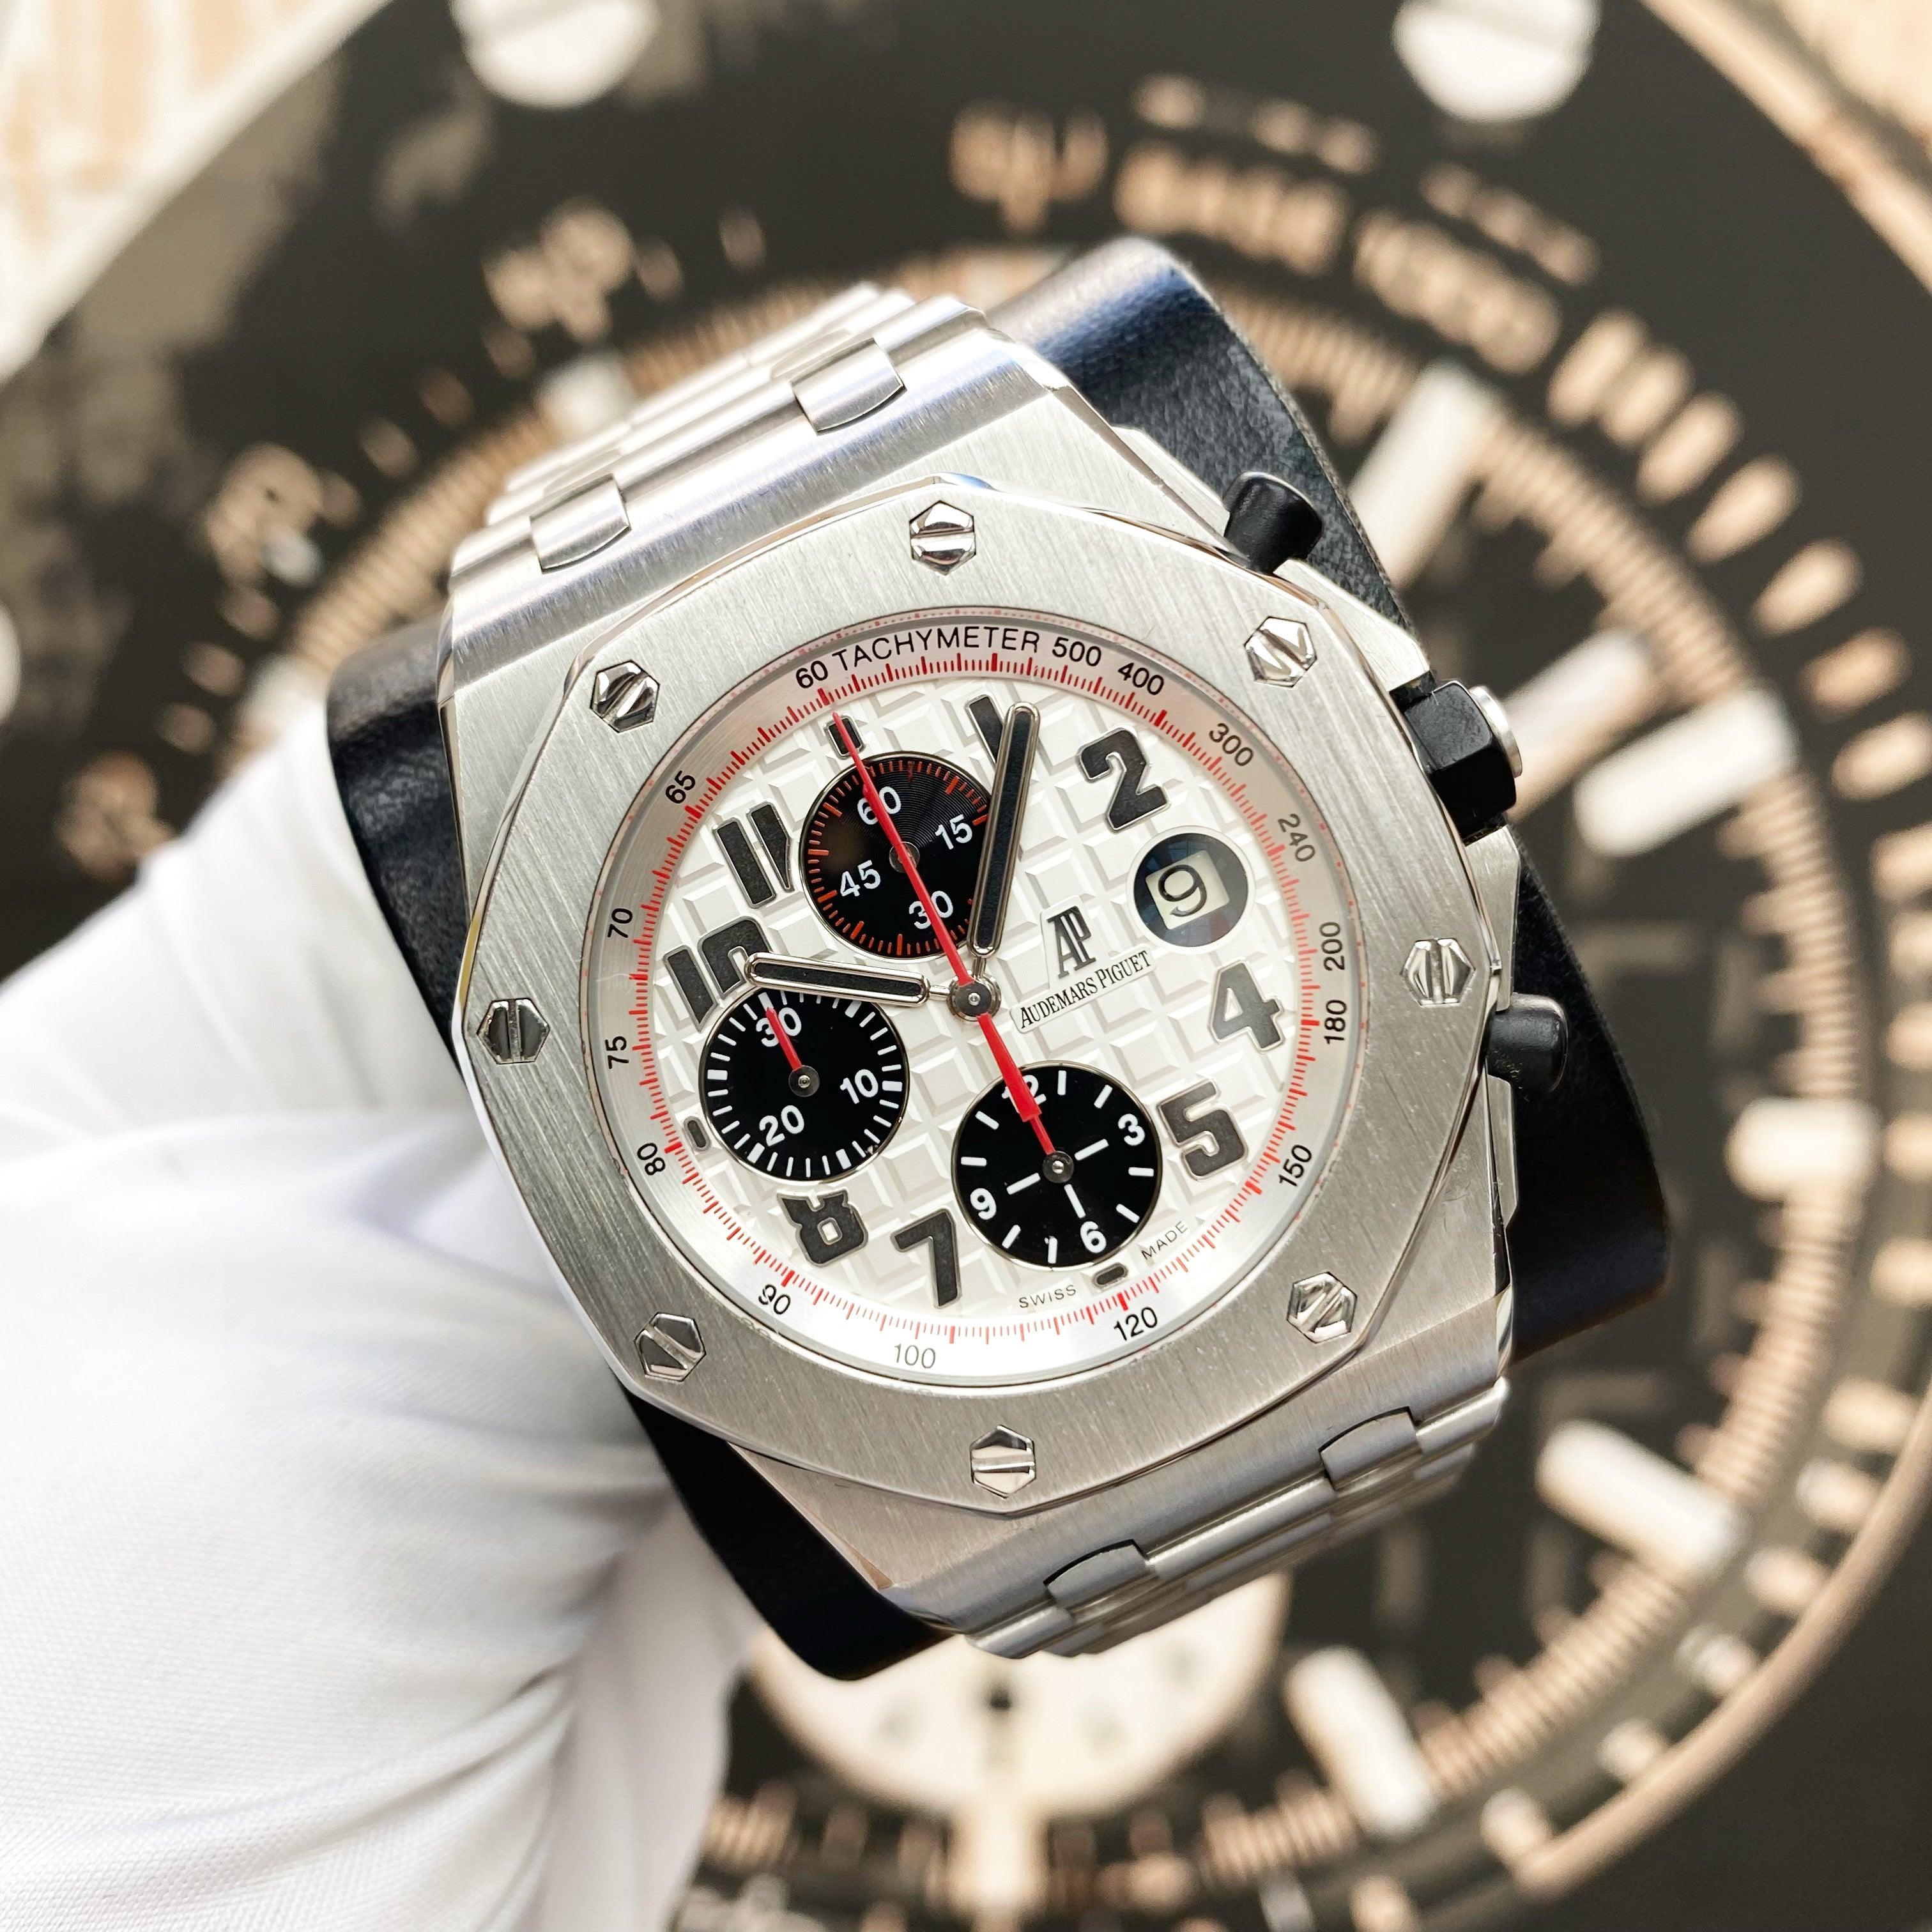 Audemars Piguet Royal Oak Offshore Chronograph 42mm 26170ST.OO.1000ST.01 White Dial Pre-Owned - Gotham Trading 